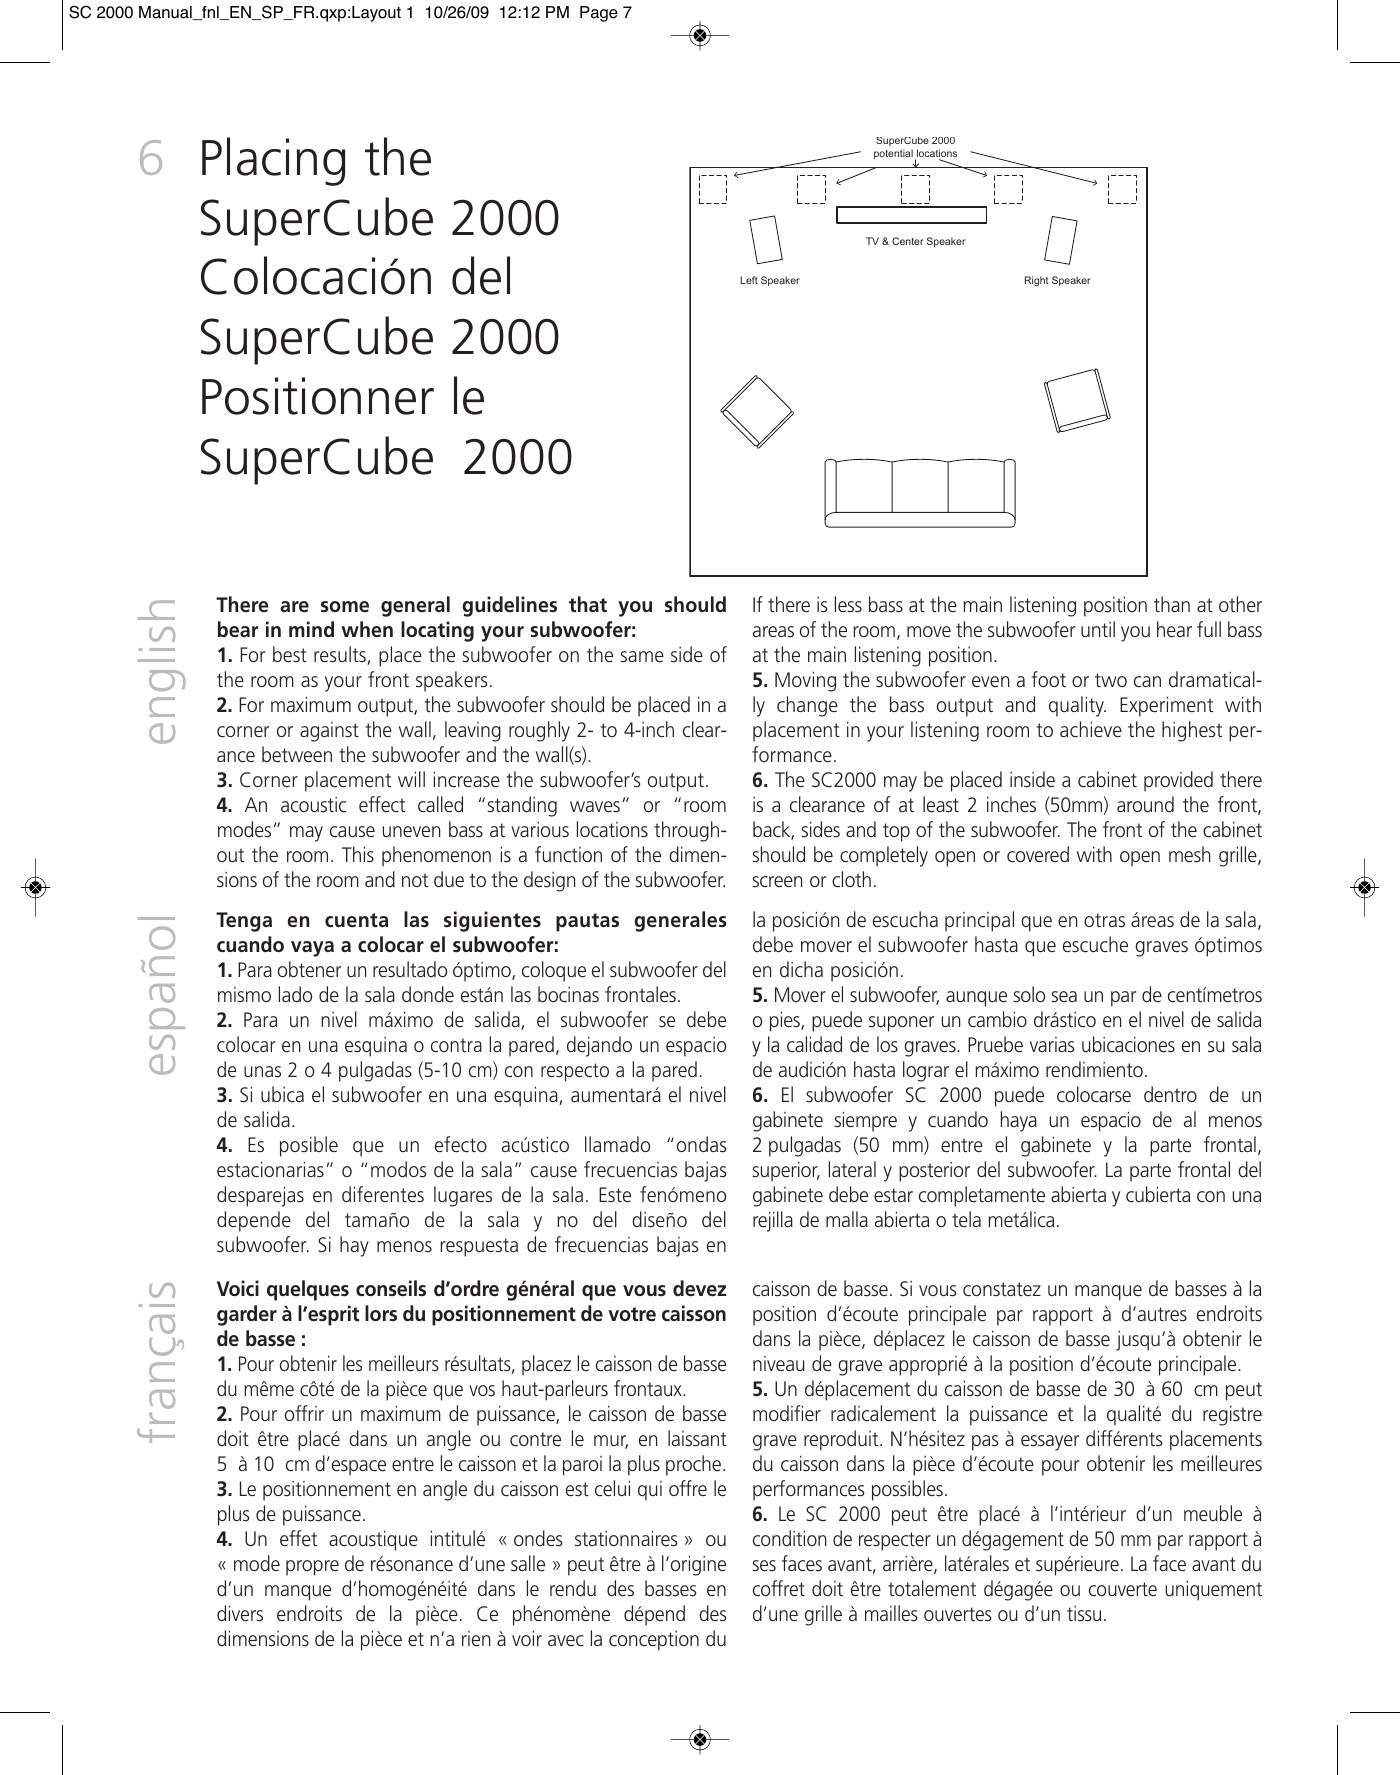 Page 6 of 12 - Definitive-Technology Definitive-Technology-Supercube-2000-Users-Manual-  Definitive-technology-supercube-2000-users-manual